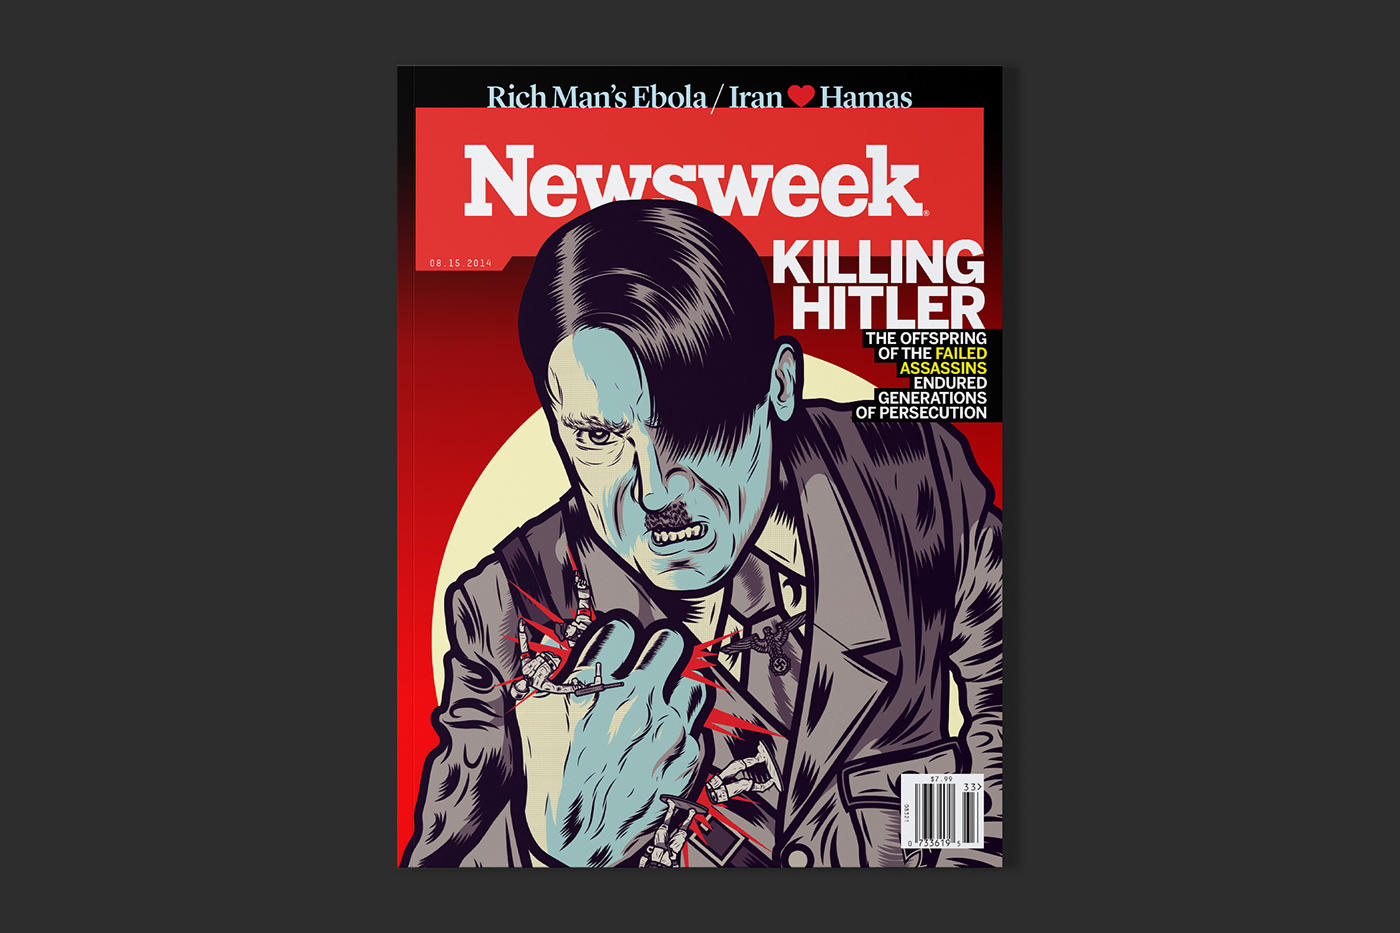 Newsweek magazine editorial publication redesign news Weekly covers